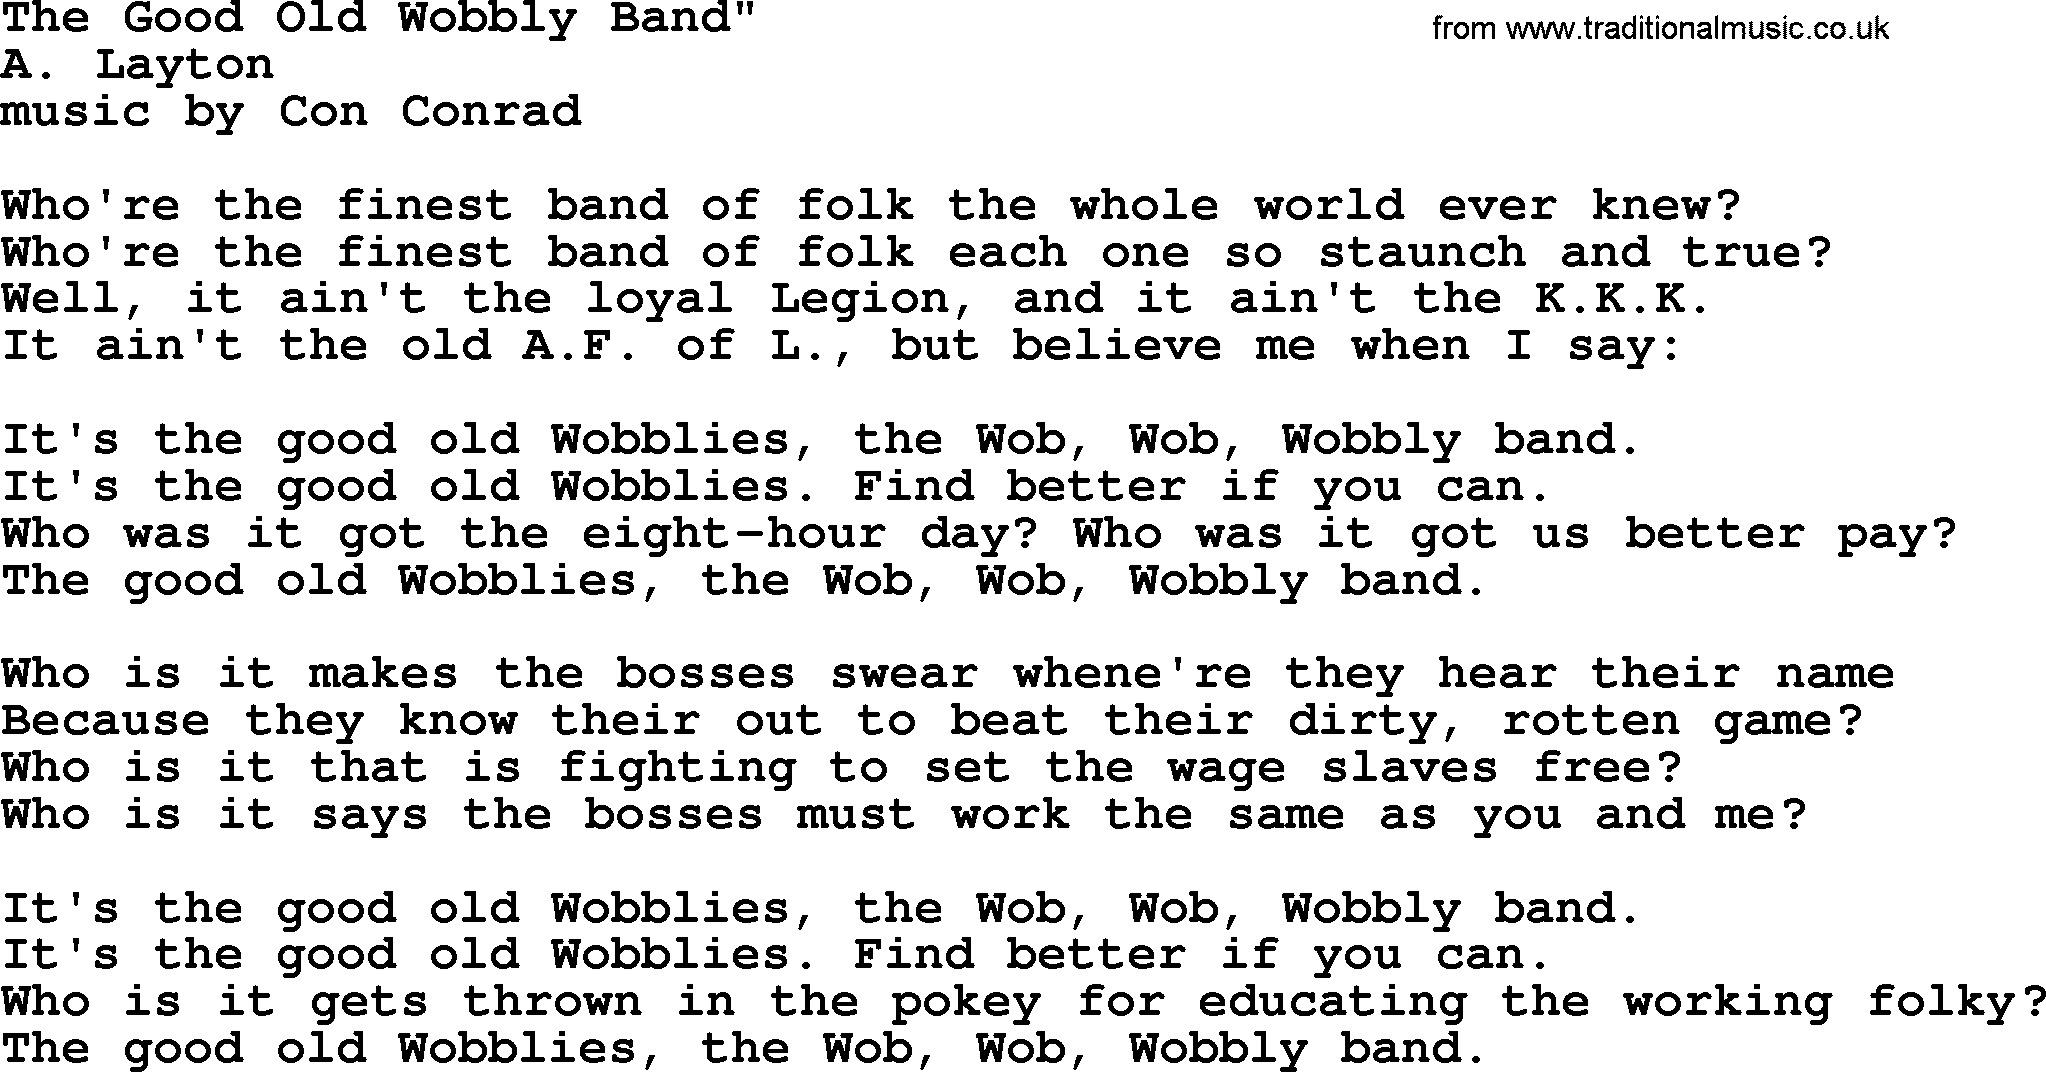 Political, Solidarity, Workers or Union song: The Good Old Wobbly Band, lyrics